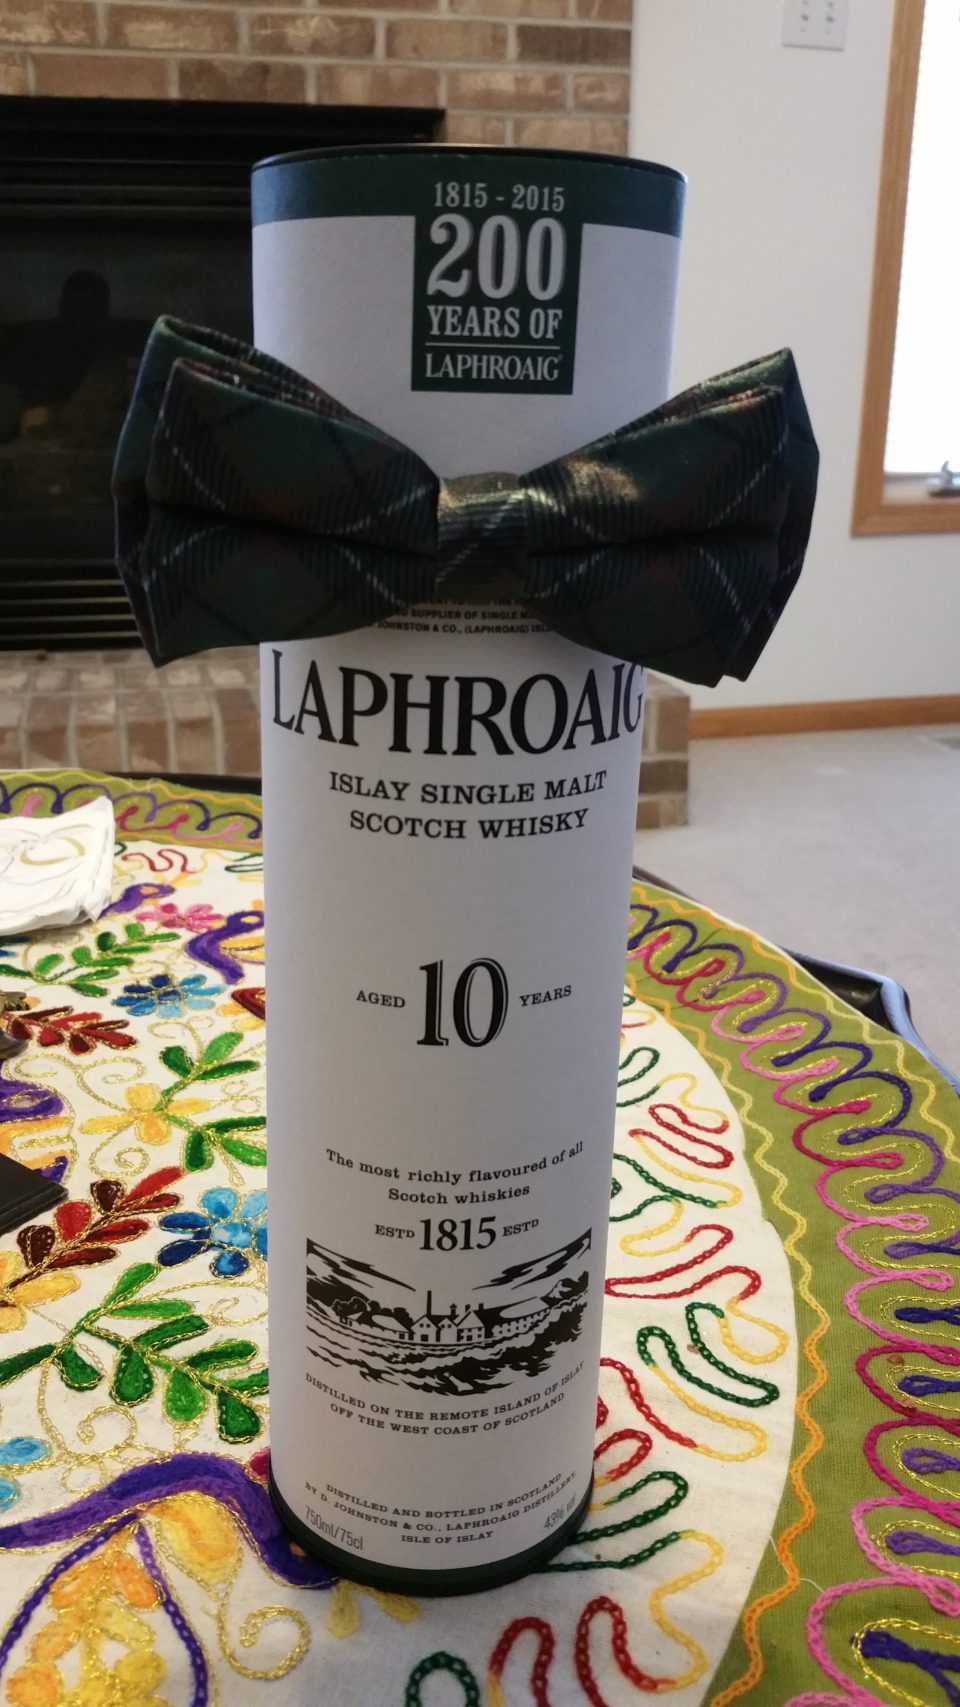 Laphroaig Scotch - Very peaty and overrated